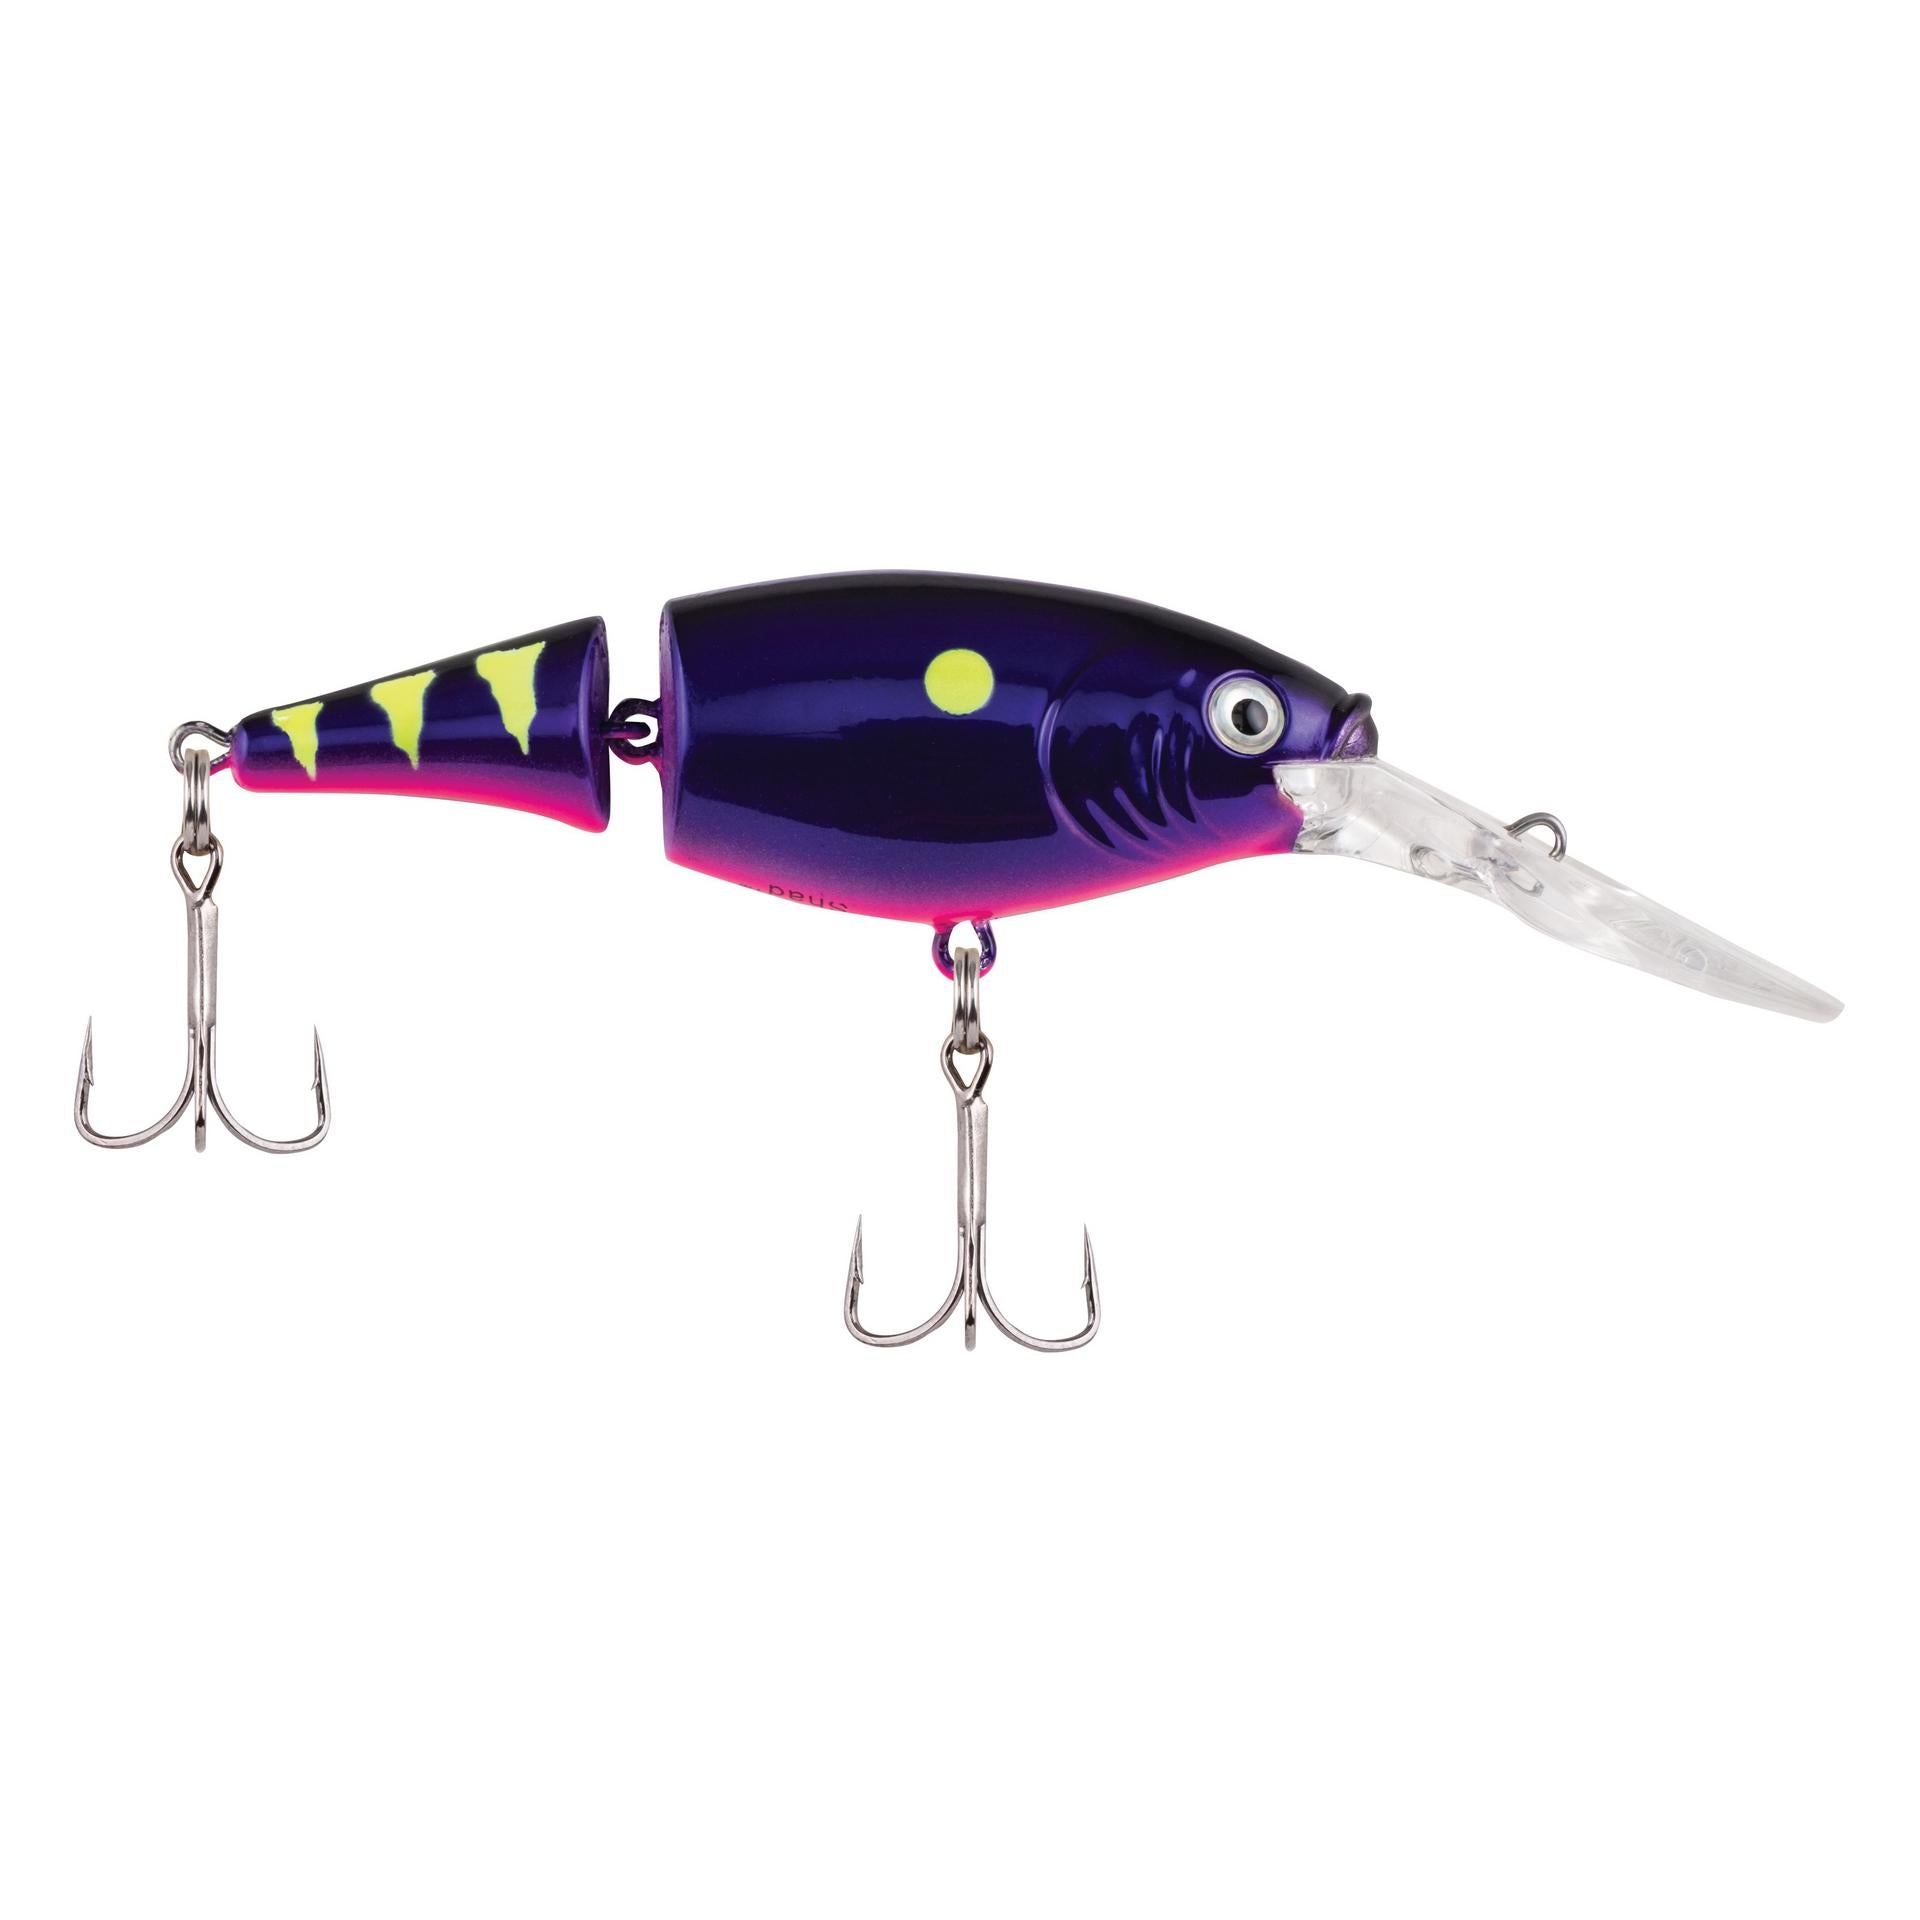 Flicker Shad® Jointed